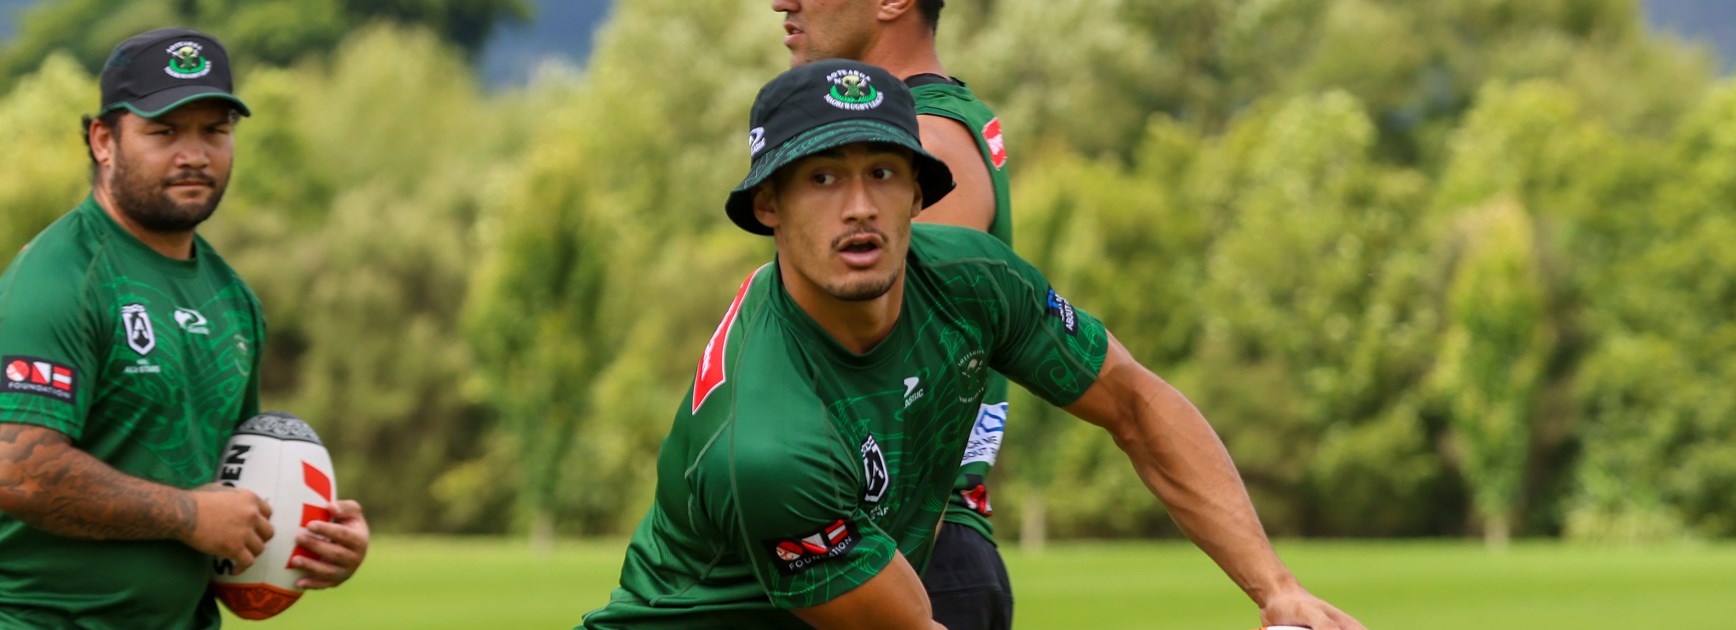 Toia soaking up unexpected Māori All Stars experience